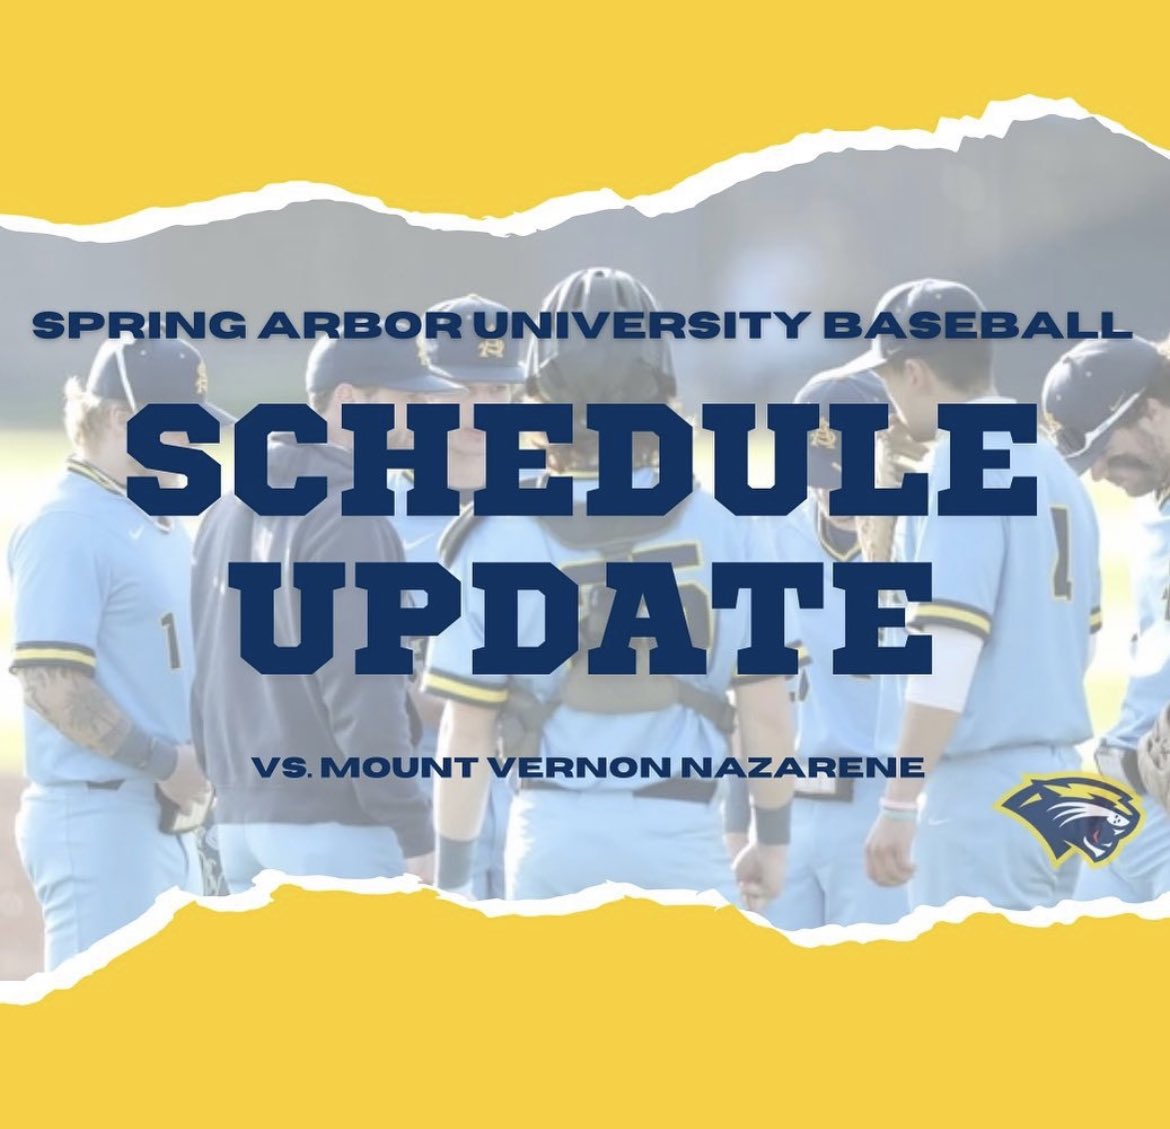 Tomorrow’s doubleheader vs. Mount Vernon Nazarene has been postponed due to poor weather conditions. Cougs will now play on Saturday and Monday!